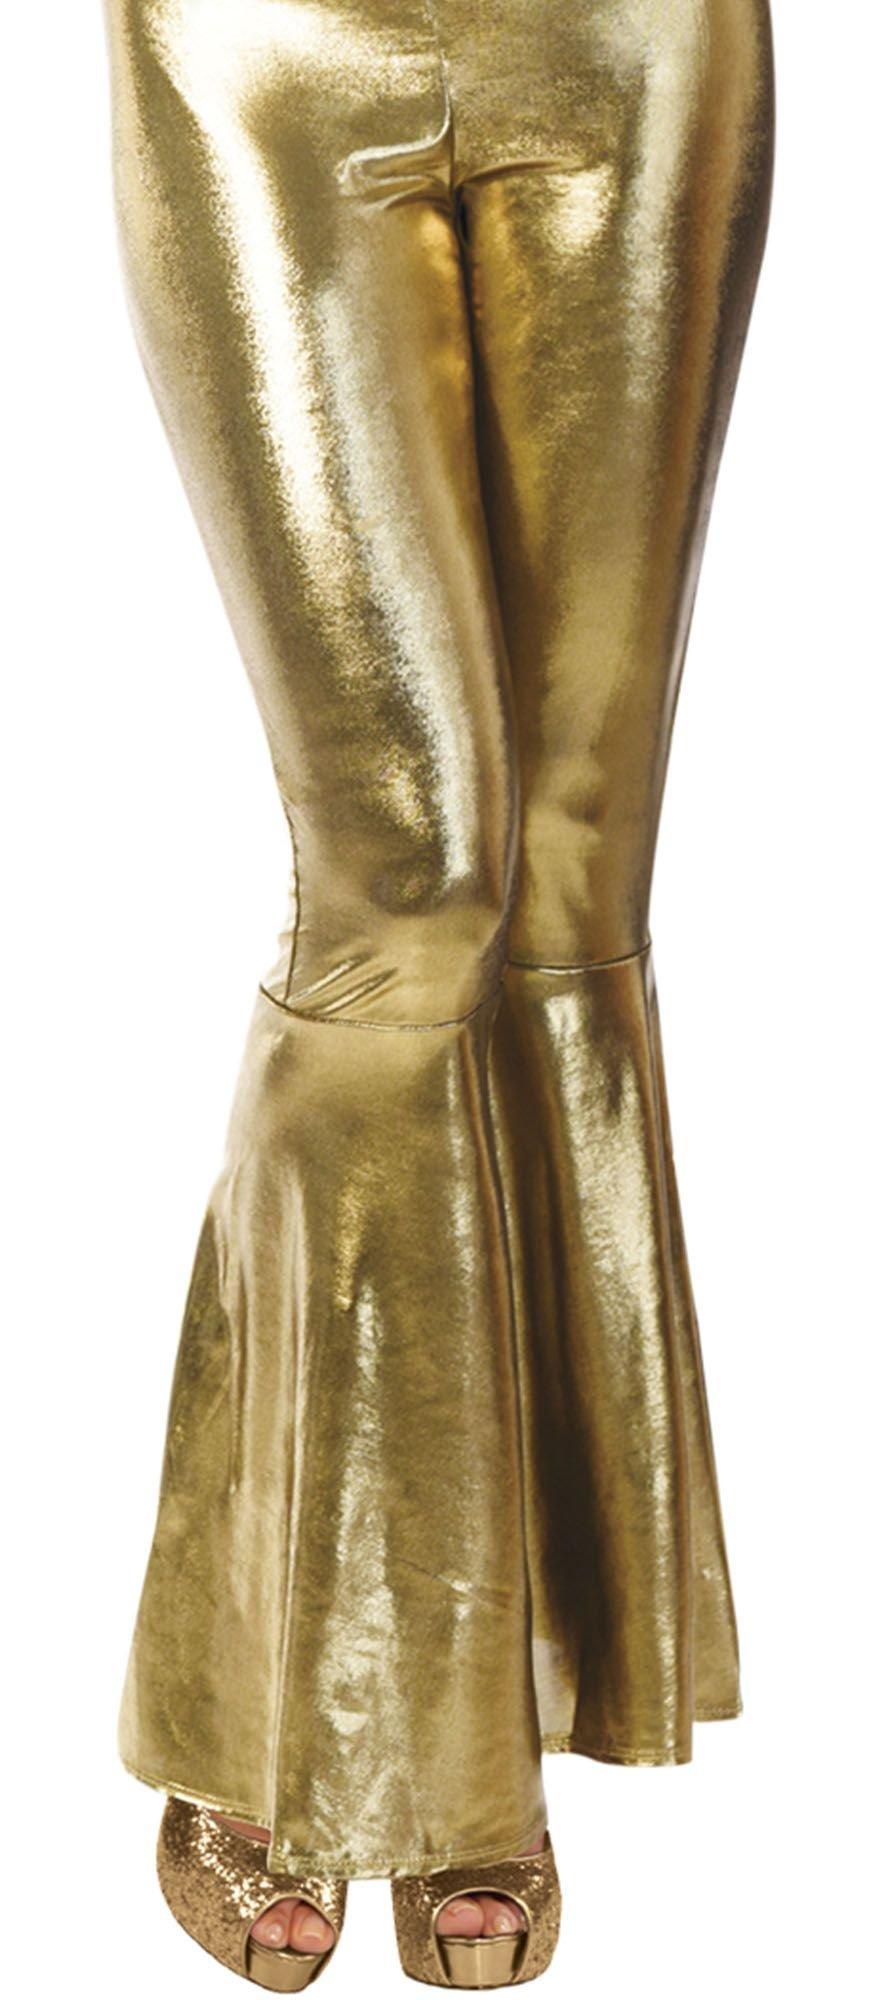 Metallic Gold 70s Bell Bottom Pants for Adults